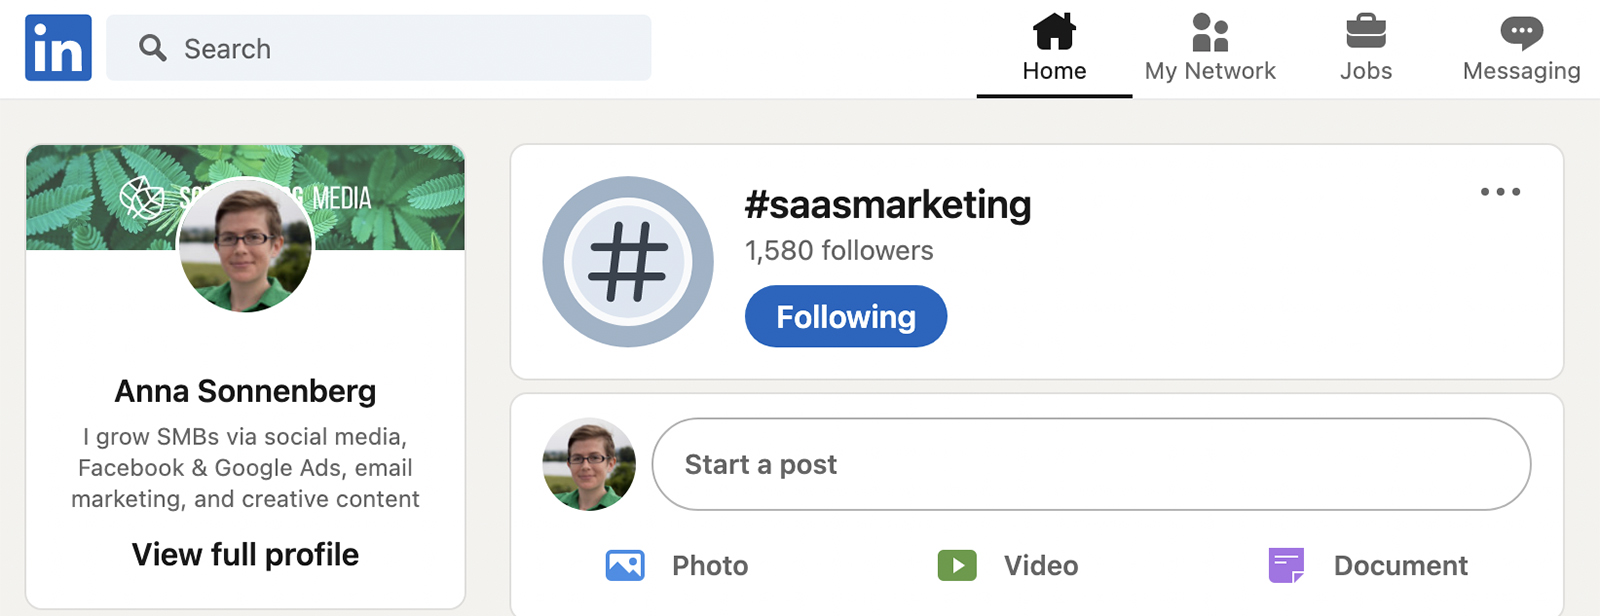 linkedin hashtag page to help find the right influencers for your brand